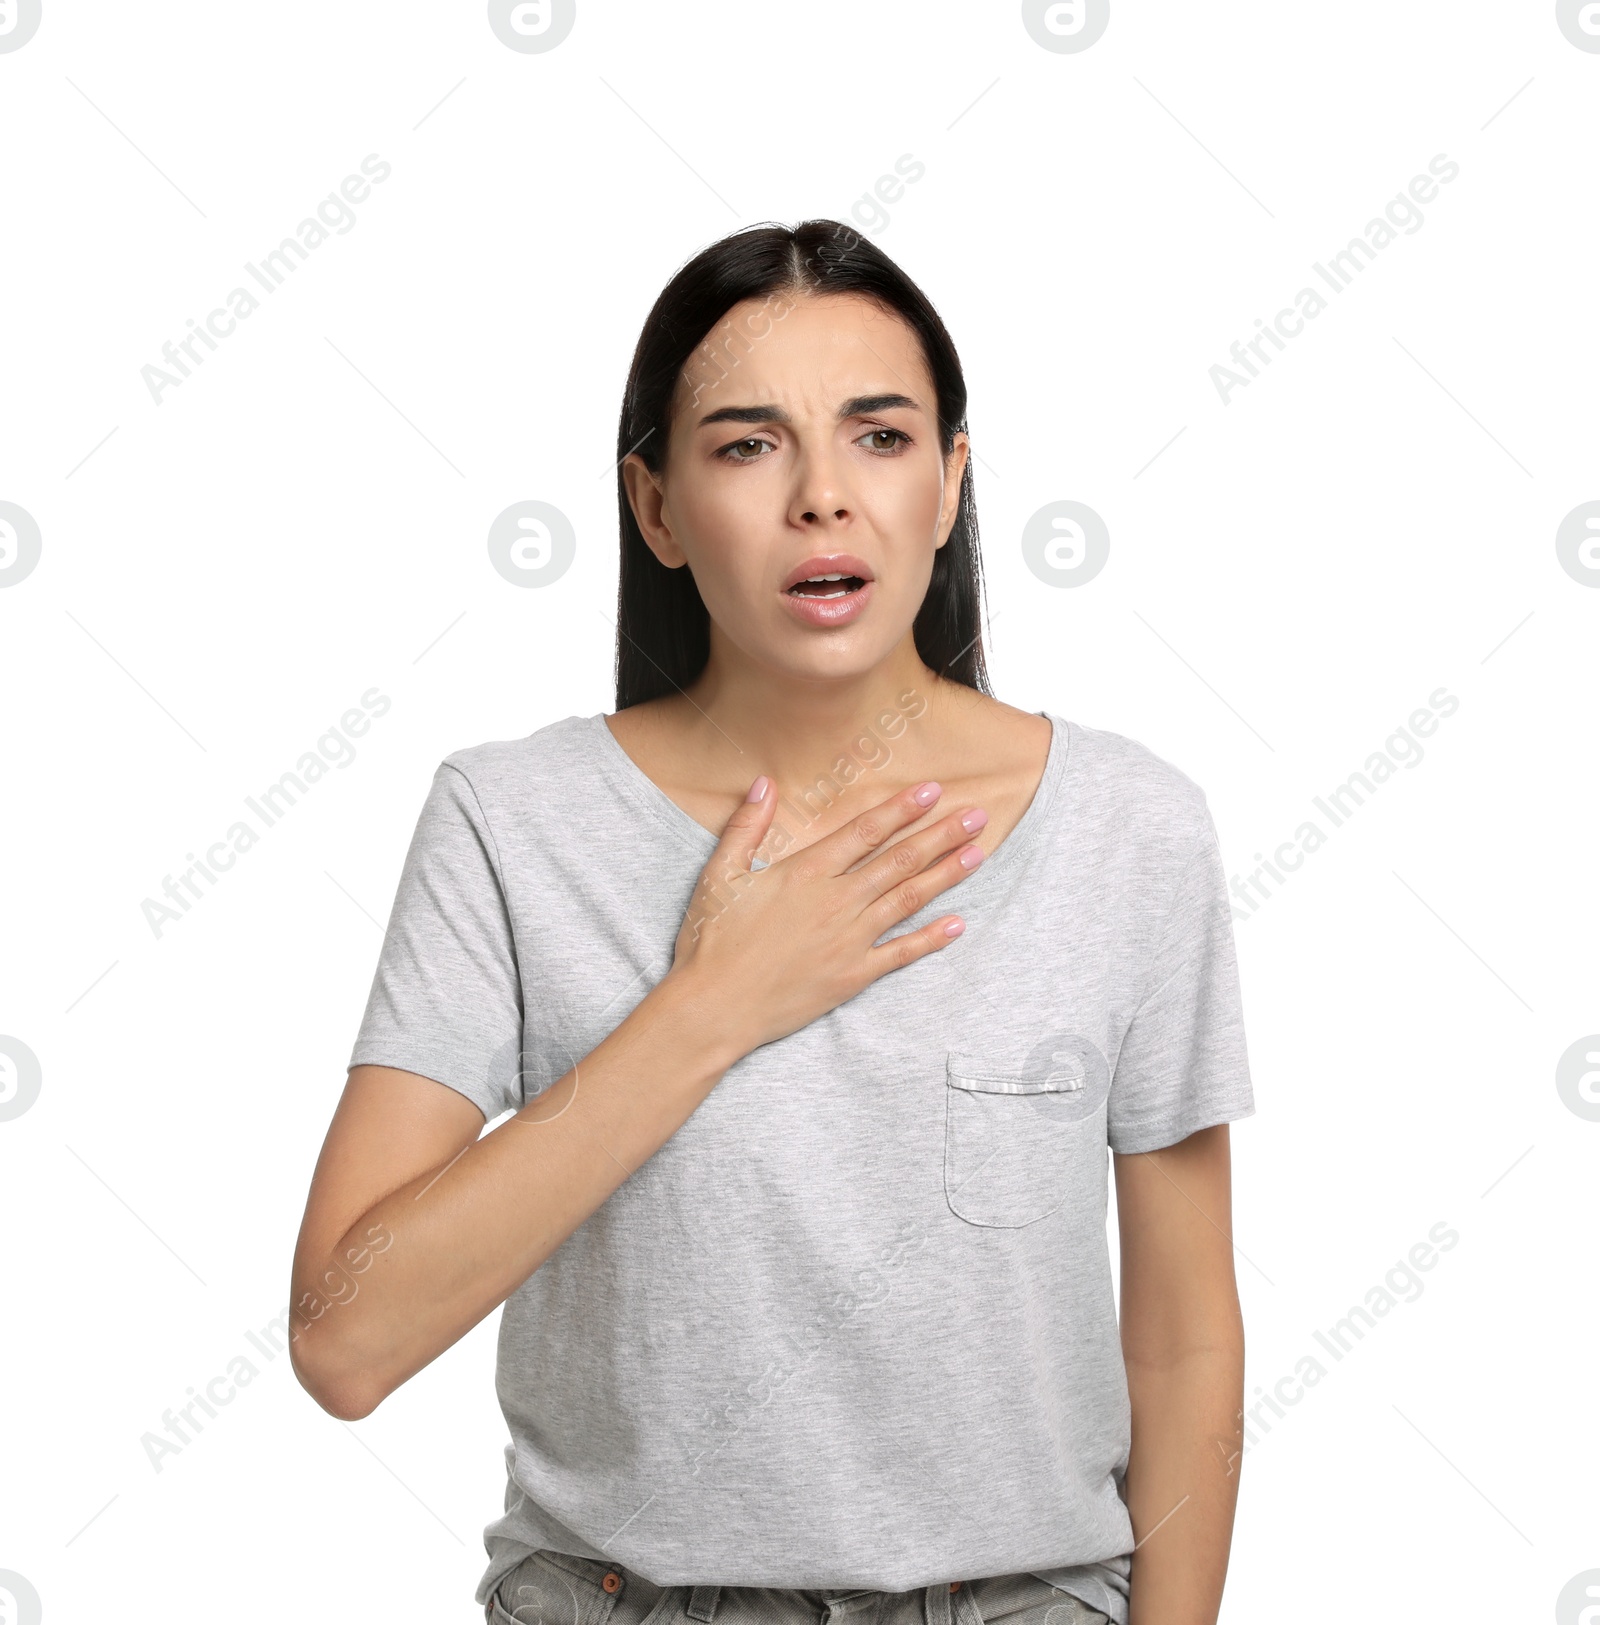 Photo of Young woman suffering from breathing problem on white background